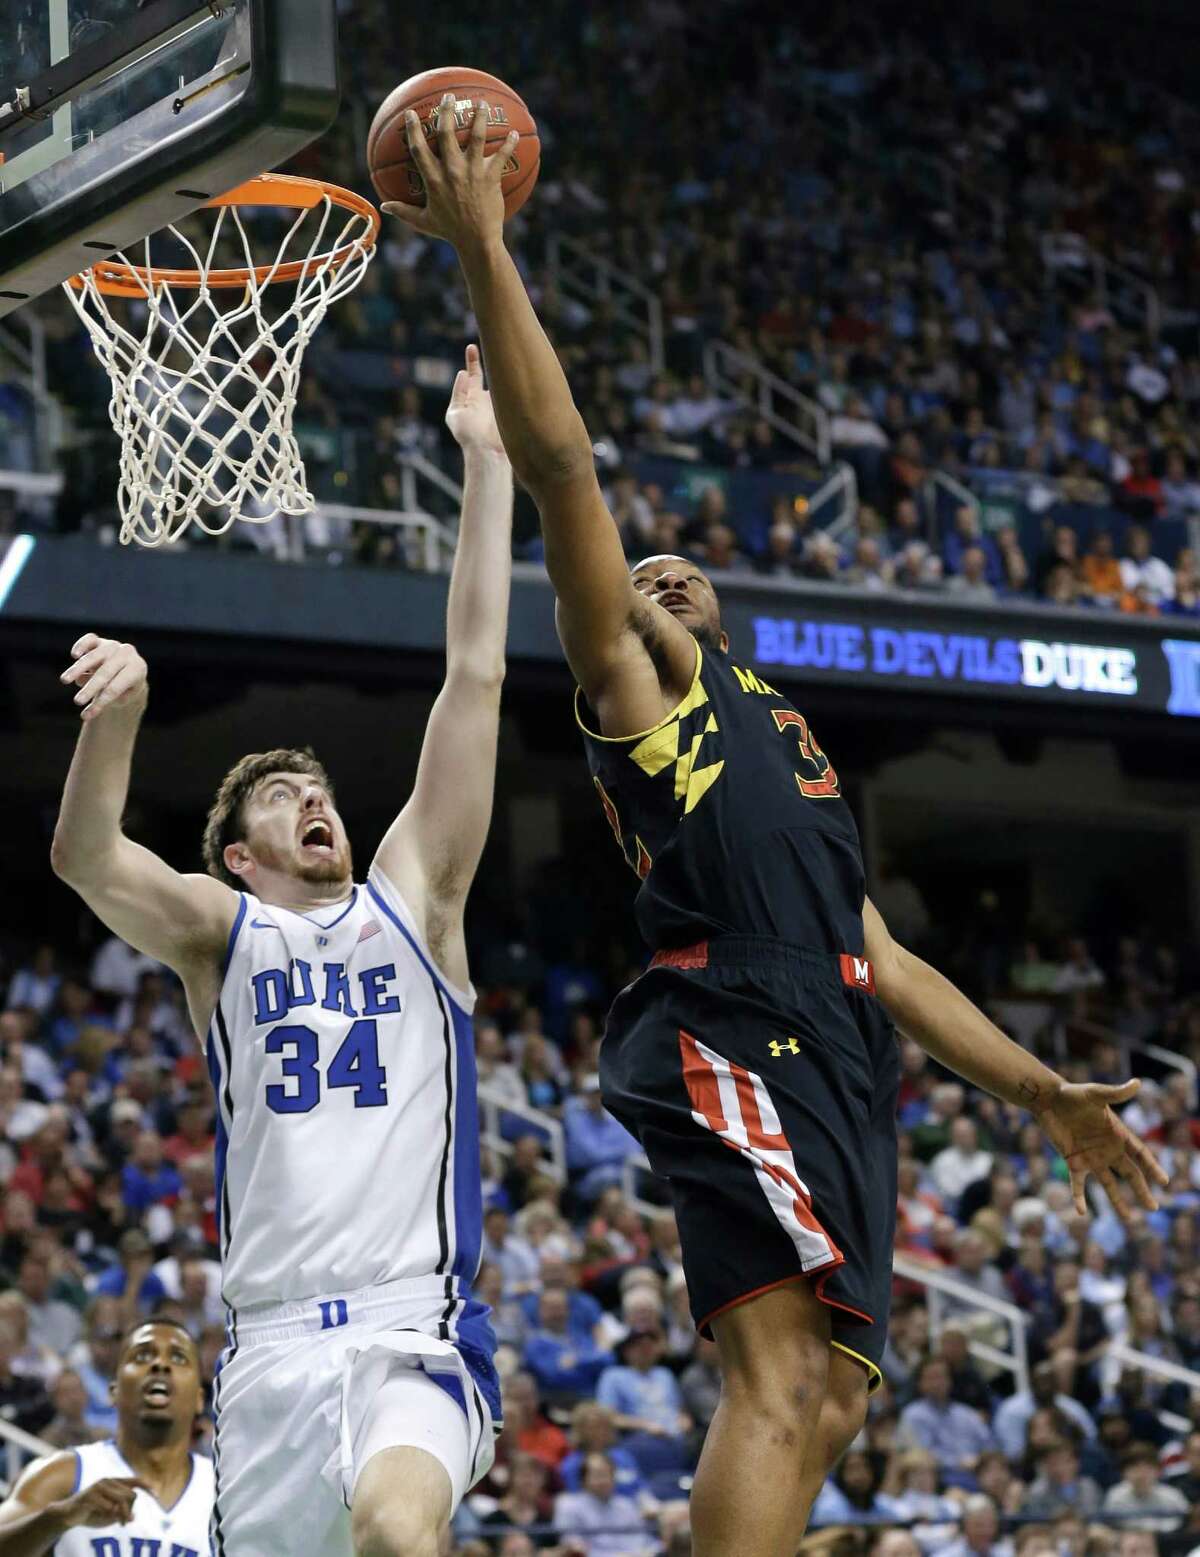 Maryland's Dez Wells, right, shoots over Duke's Ryan Kelly during the first half of an NCAA college basketball game at the Atlantic Coast Conference men's tournament in Greensboro, N.C., Friday, March 15, 2013. (AP Photo/Gerry Broome)